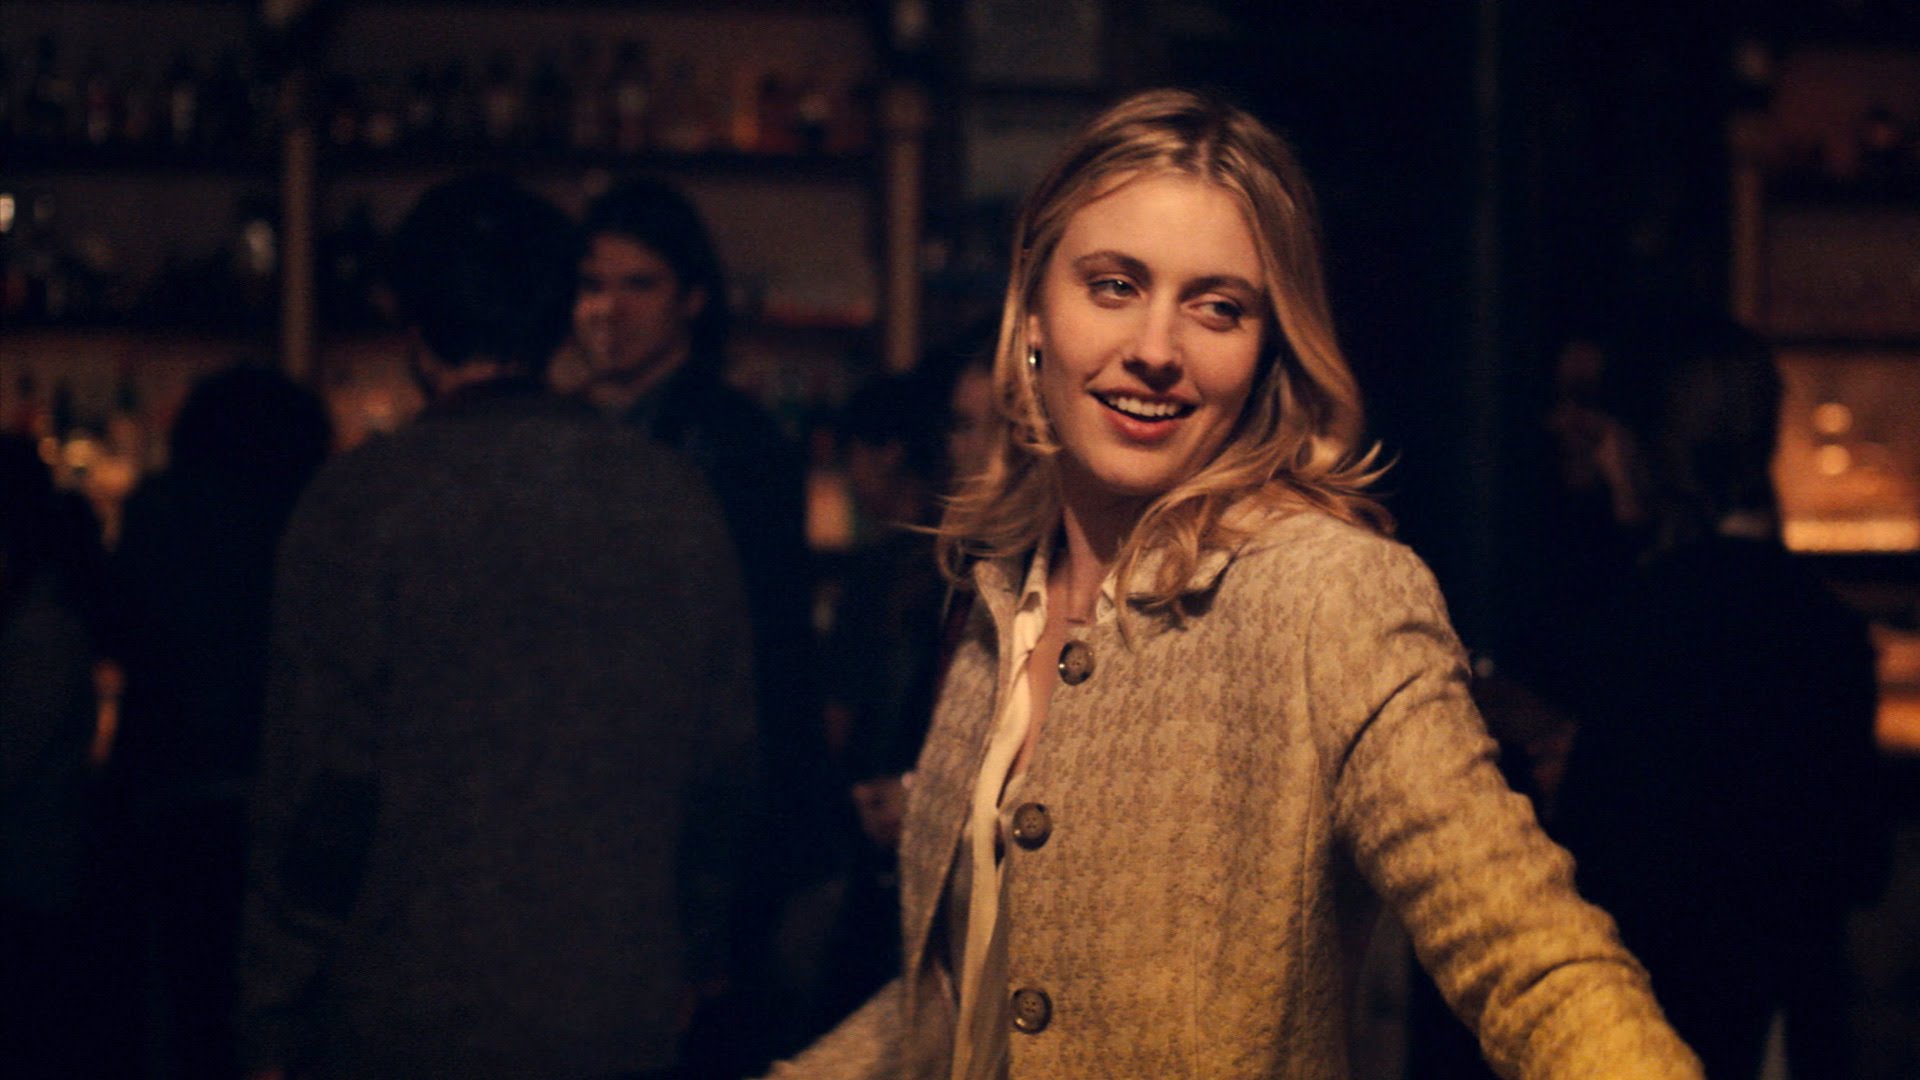 Noah Baumbach returns with. and. 